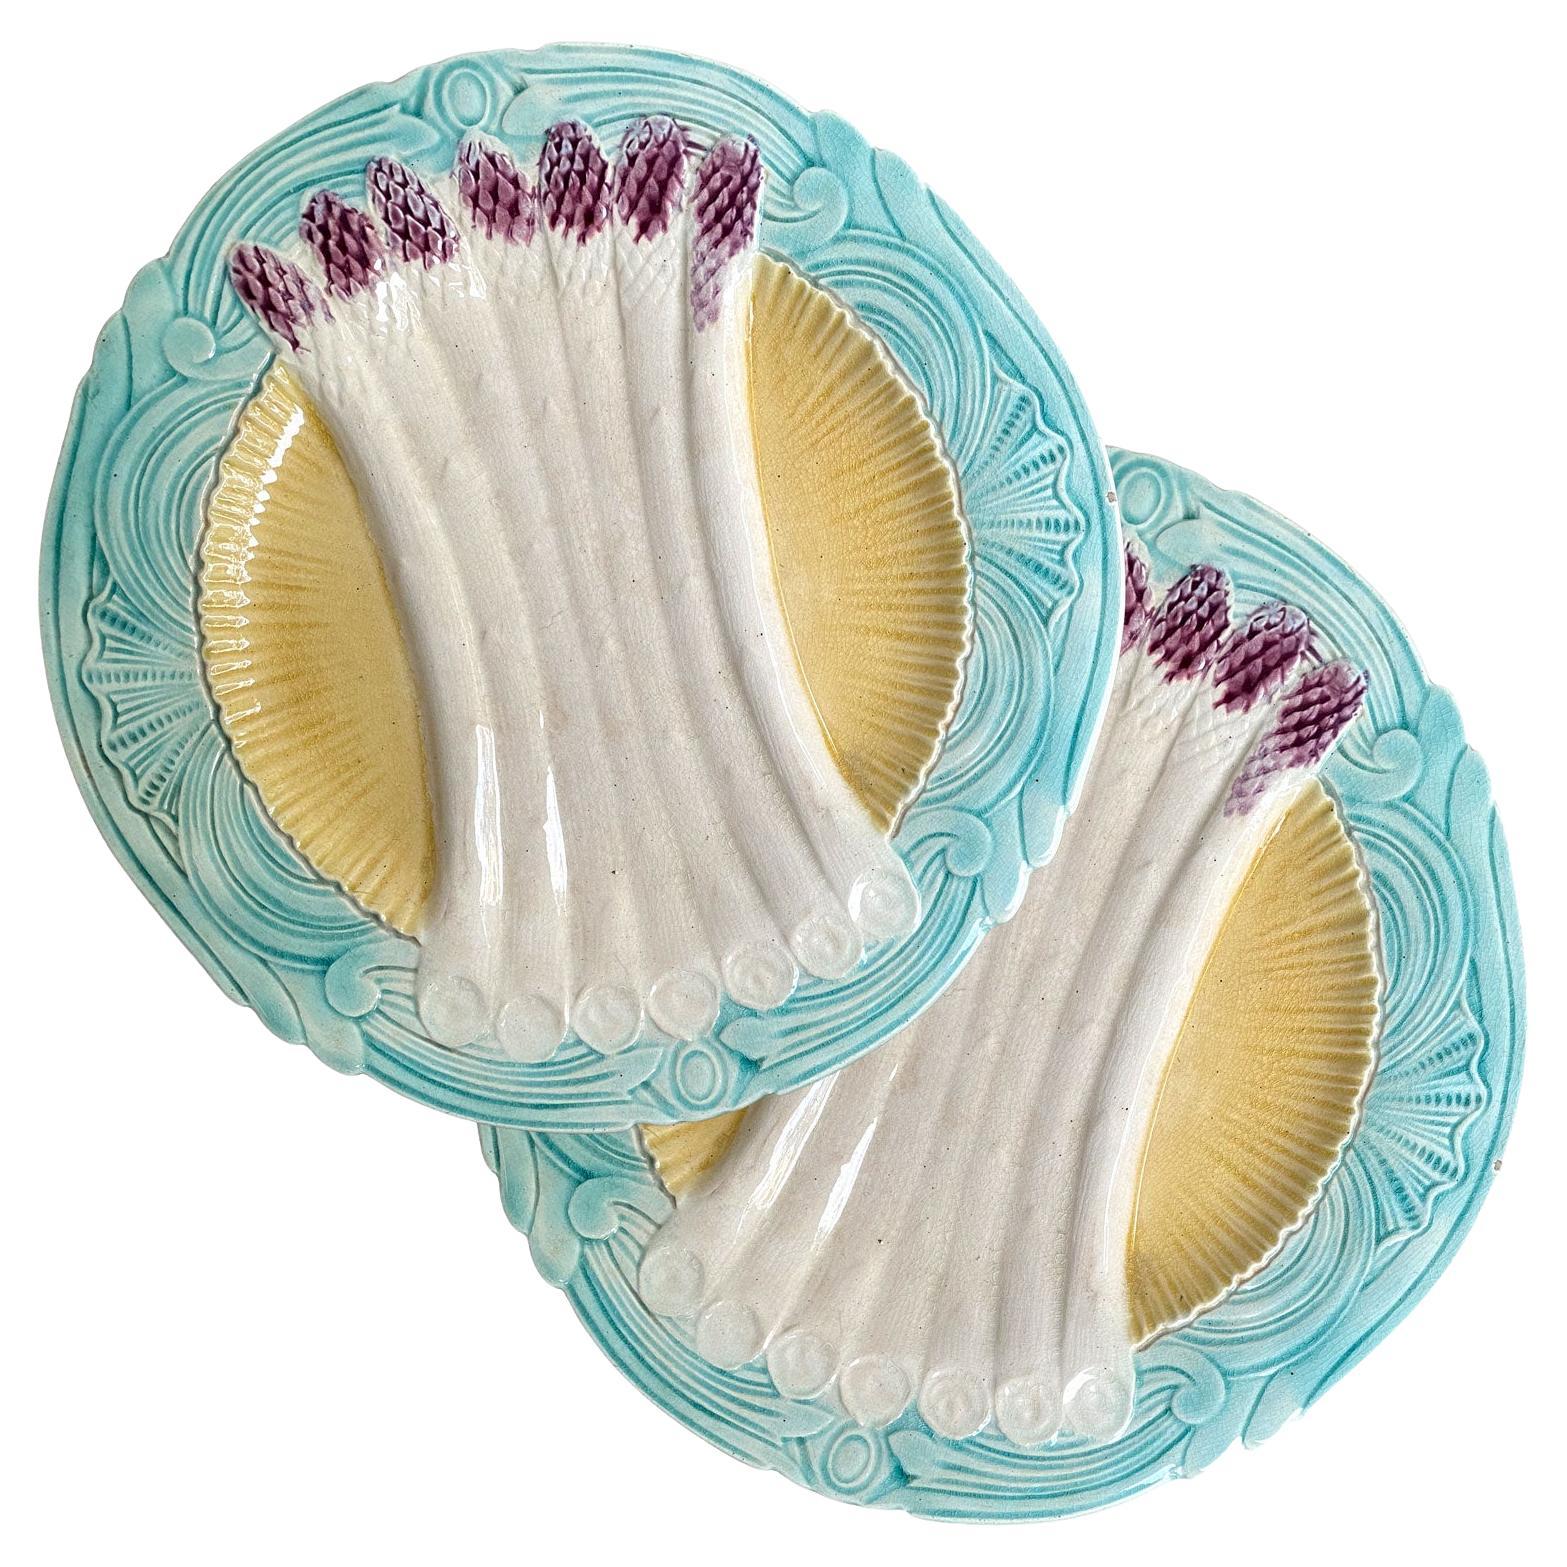 Majolica Asparagus Plates Art Nouveau Style Set of 4 Manufactured by Orchies